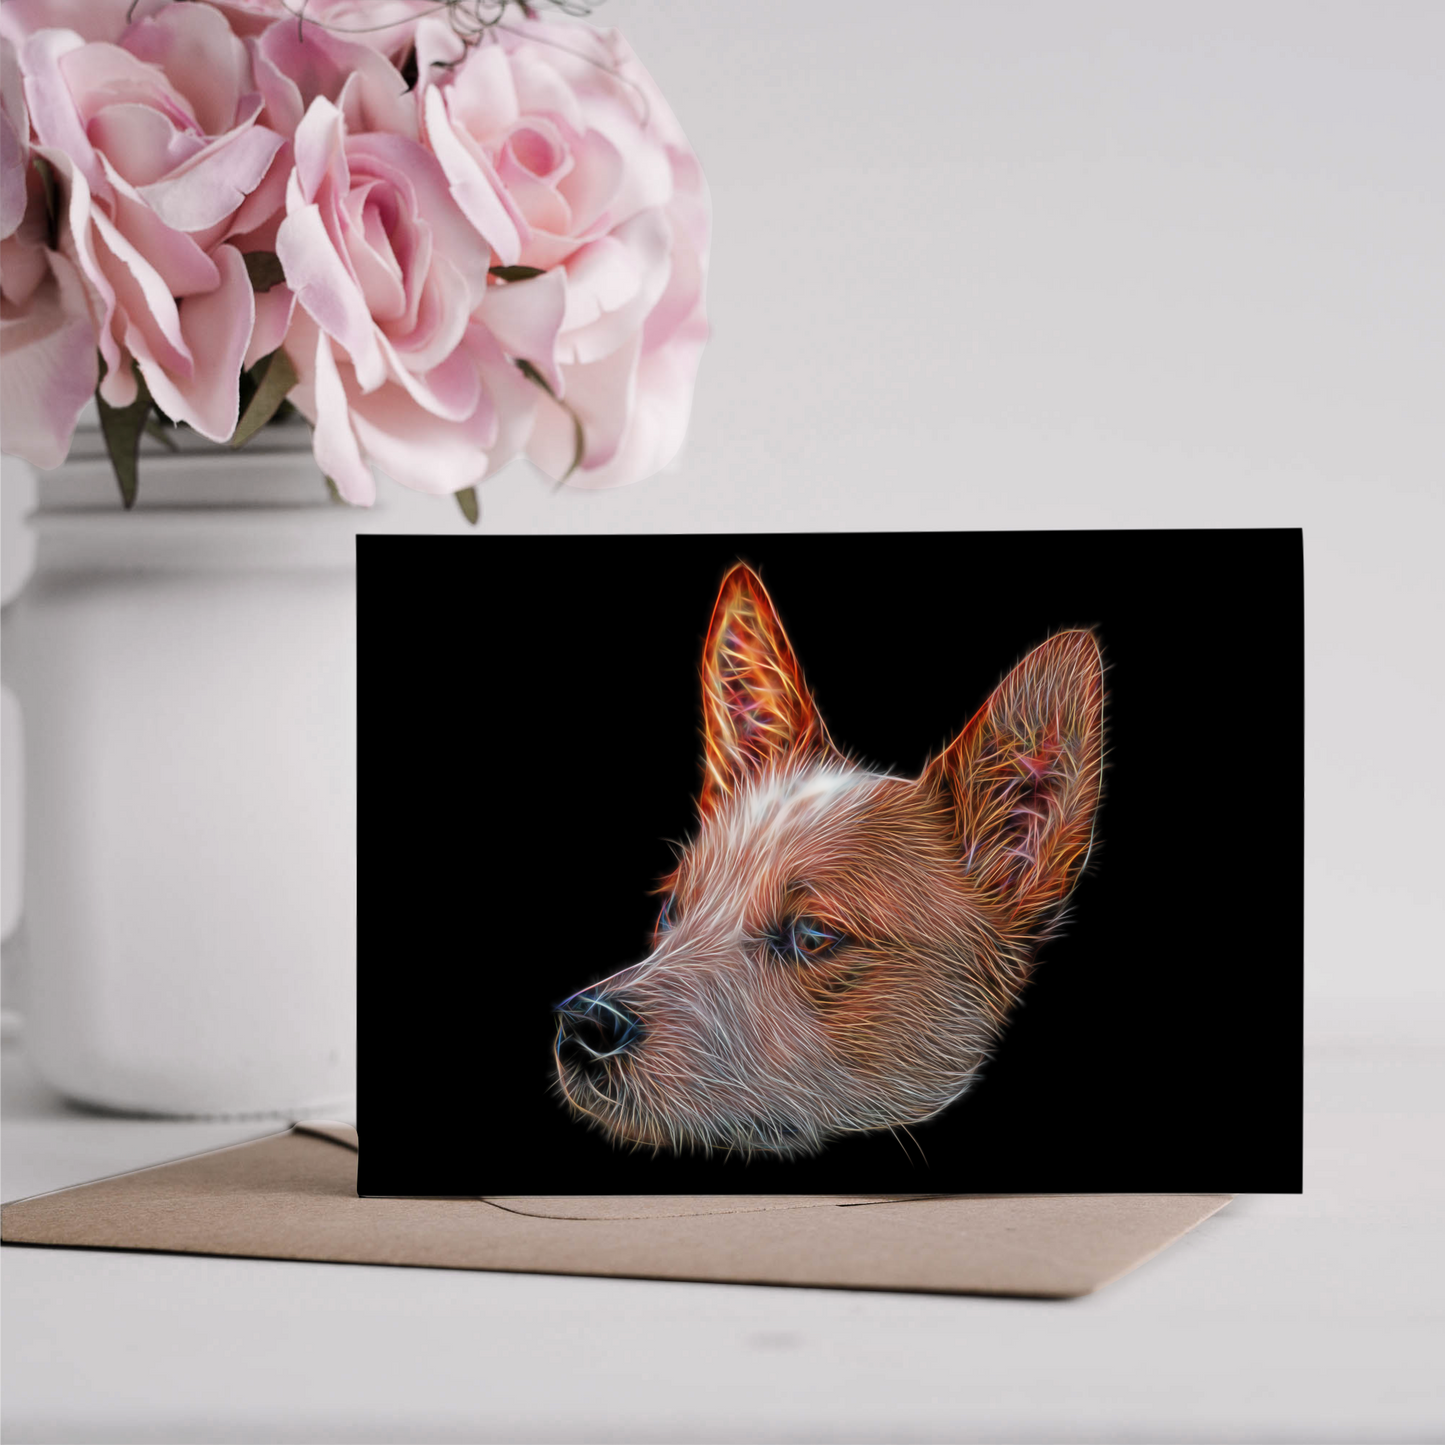 Australian Cattle Dog Greeting Card, Red Heeler Blank Inside for Birthdays or any other Occasion